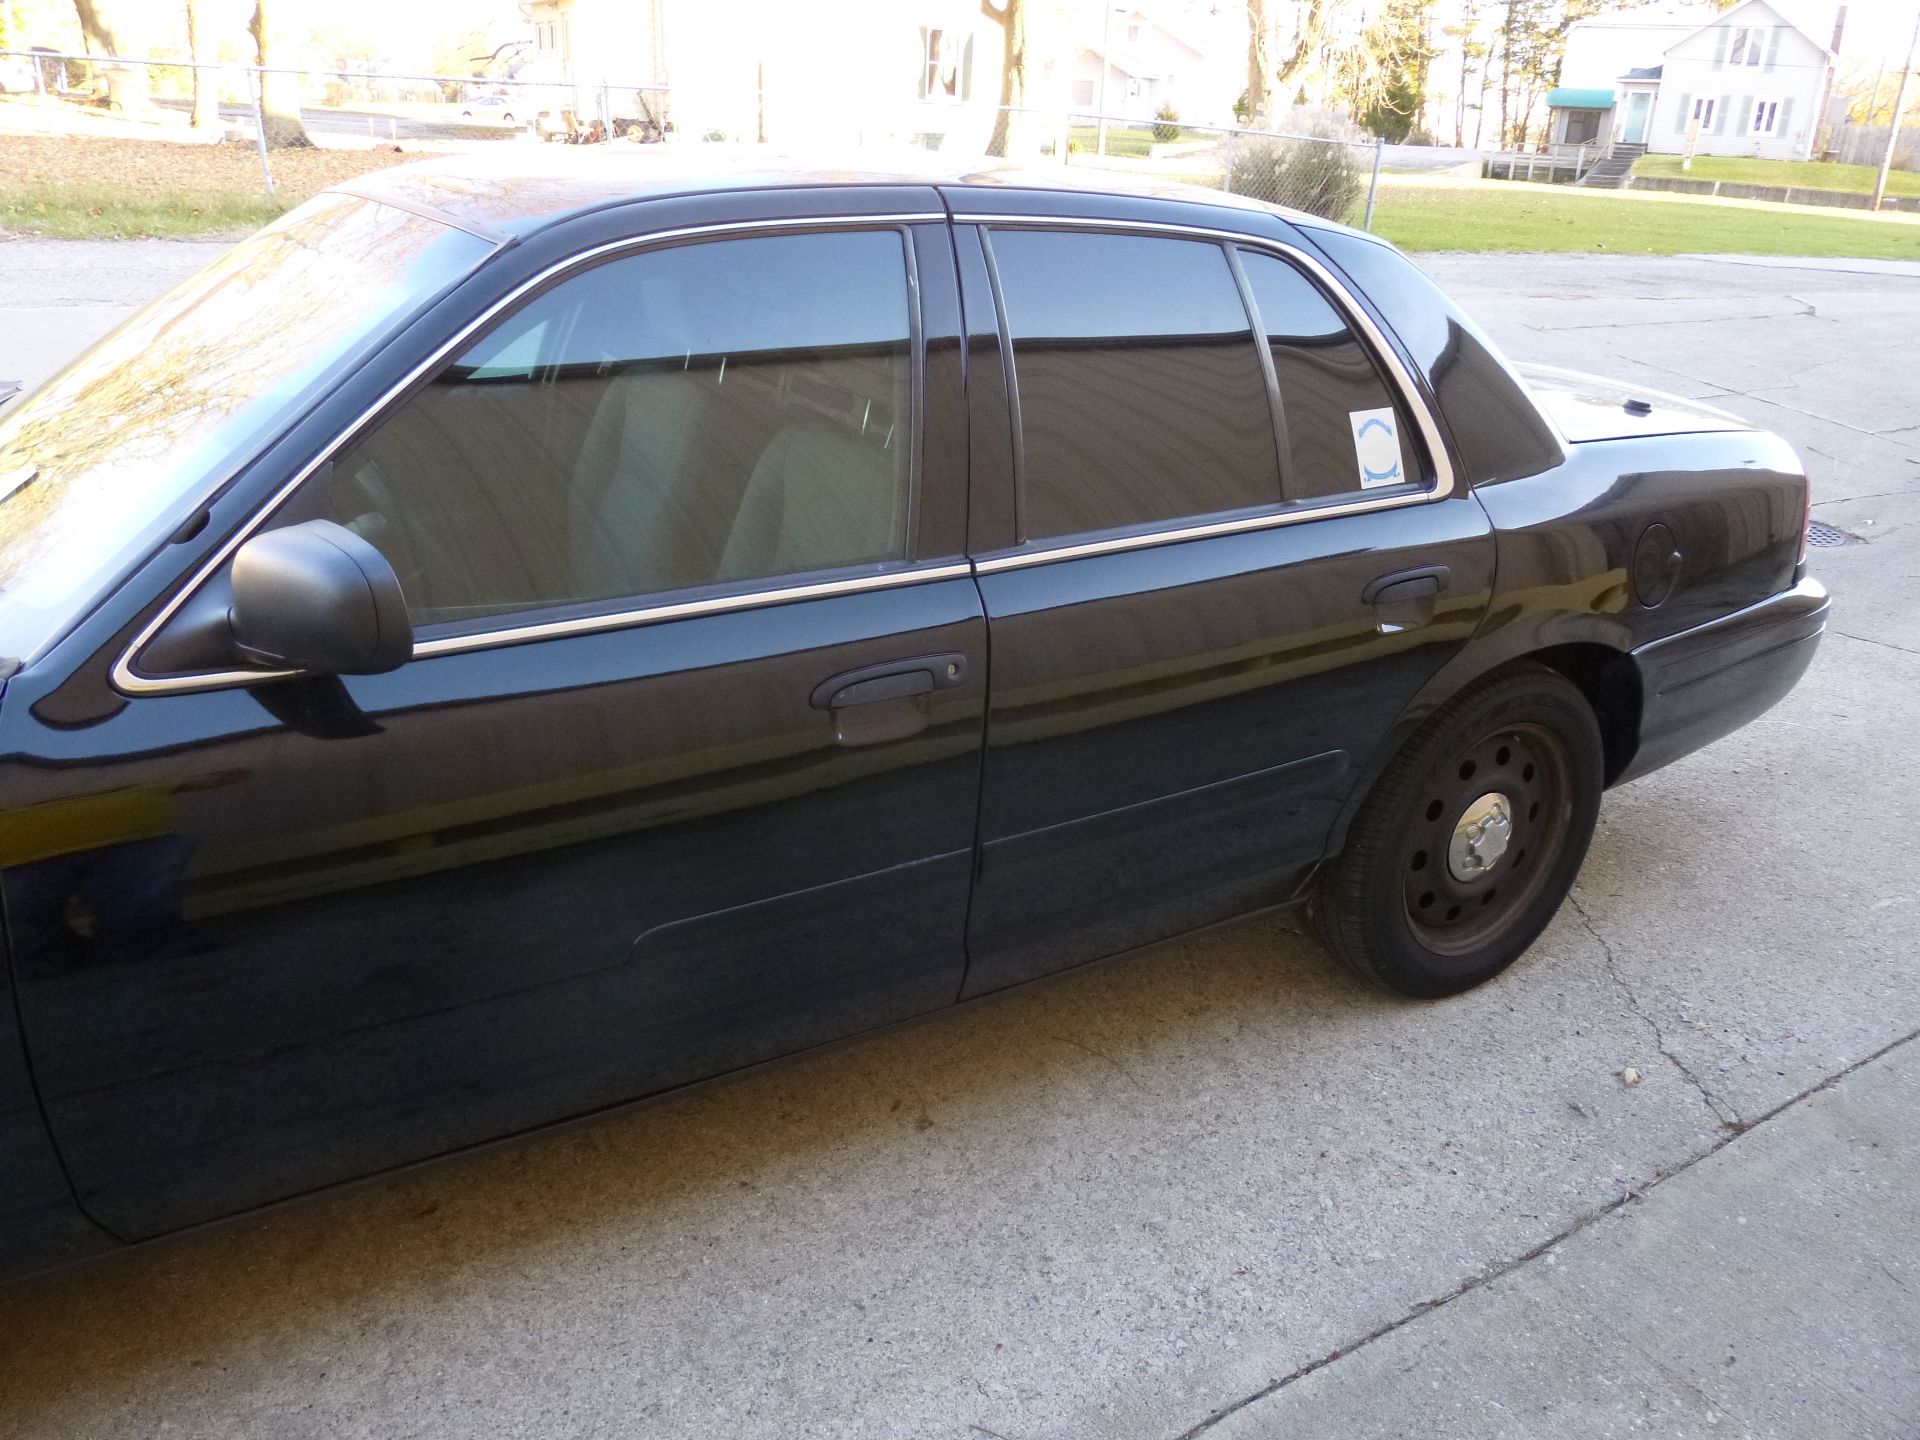 2008 Ford Crown Victoria 2FAFP71V88X176726 police interceptor 114,844 miles displayed Municipally - Image 4 of 13